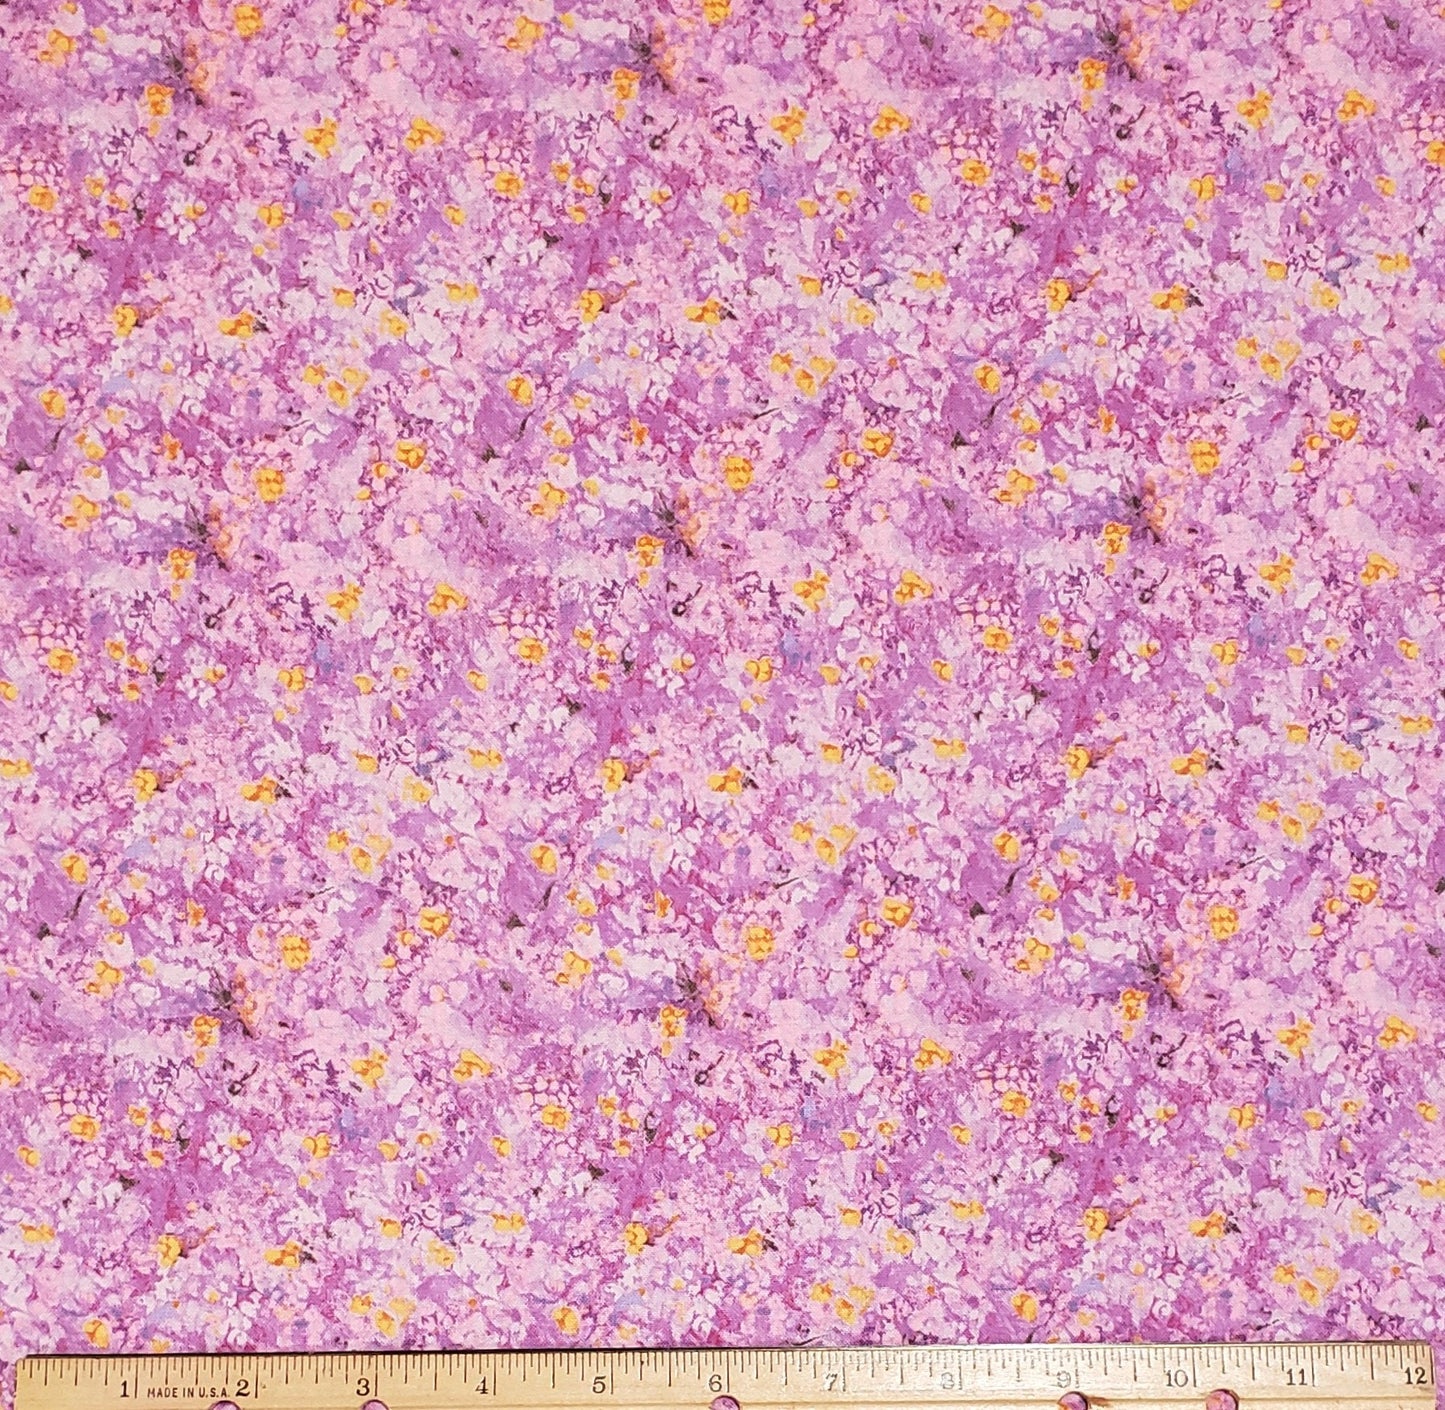 Here Comes the Sun by RJR Fabrics 2004 - Pink and Purple Swirled Fabric / Bright Pops of Yellow